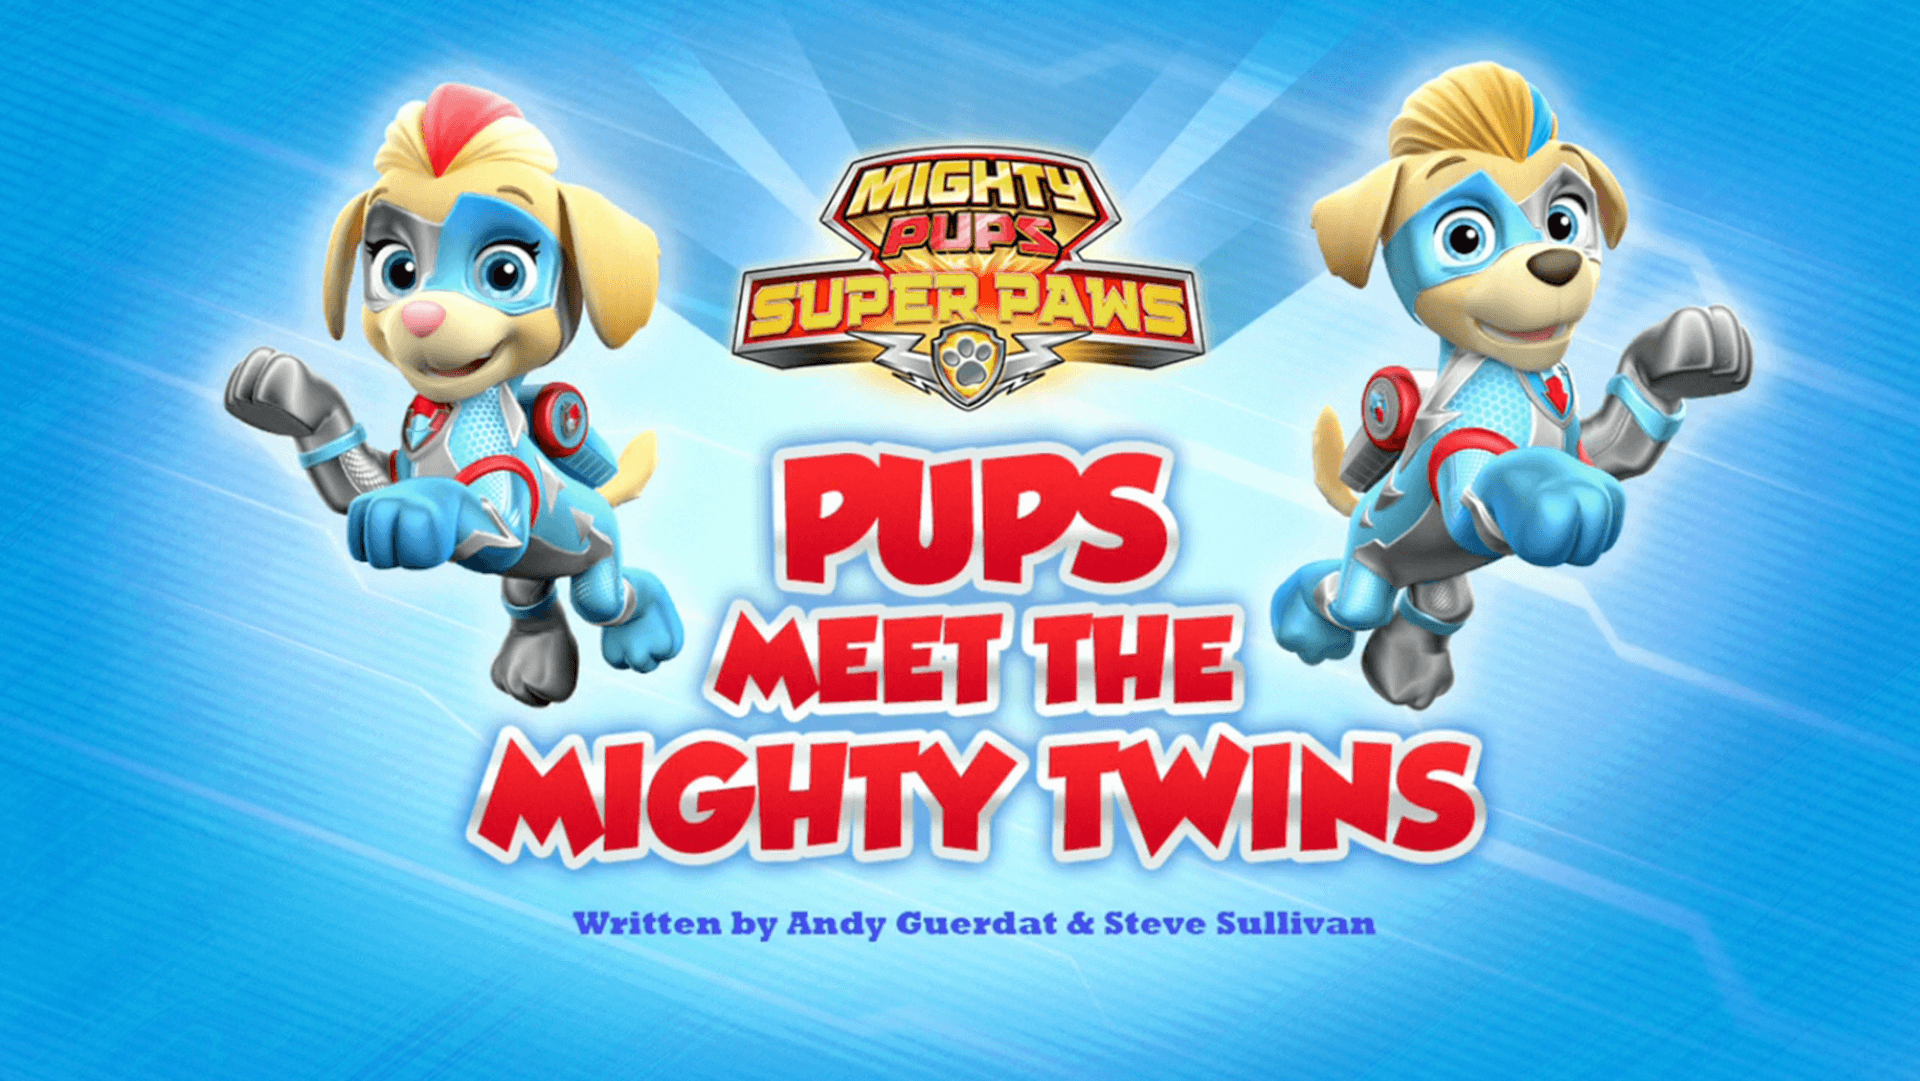 Mighty Pups, Super Paws: Pups Meet the Mighty Twins. PAW